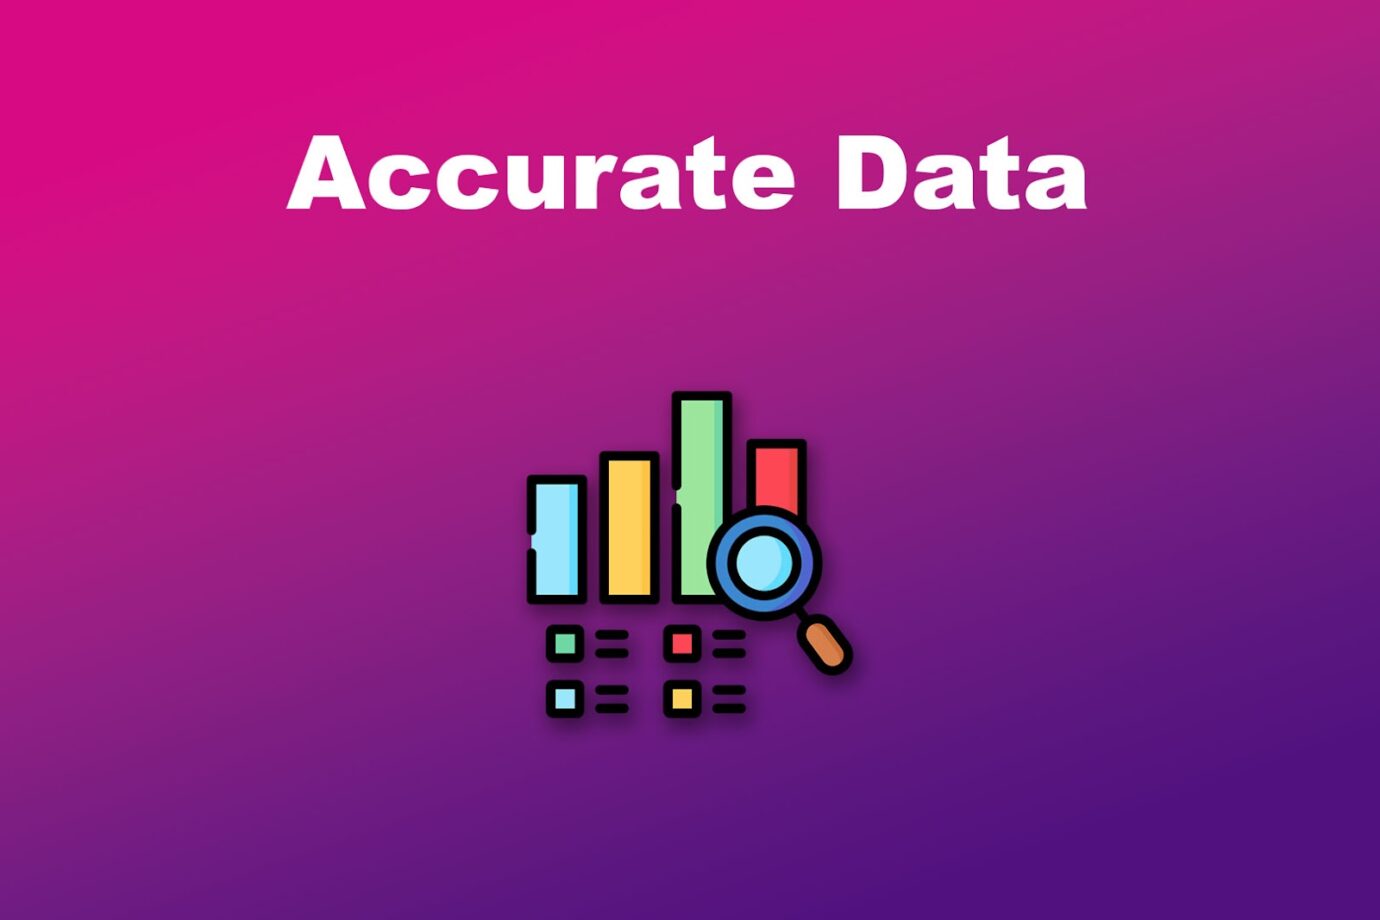 Advantage of Manual Data Entry - Accurate Data